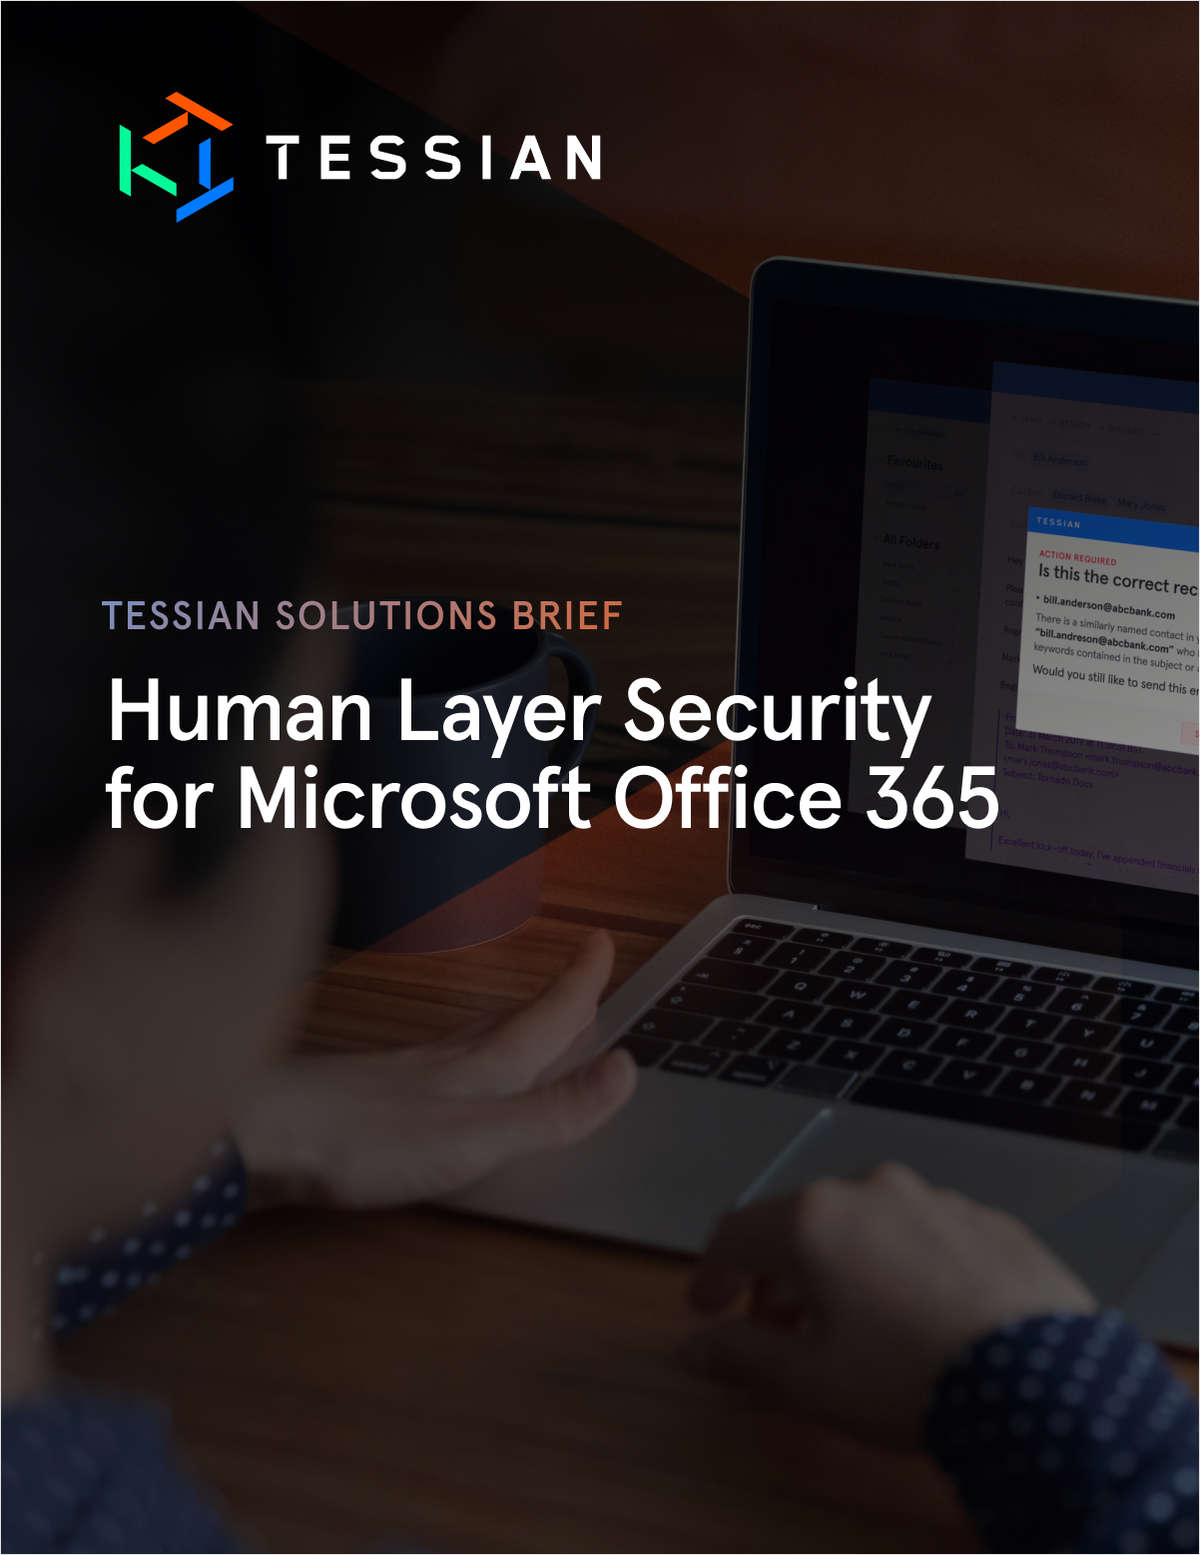 Human Layer Security for Microsoft Office 365